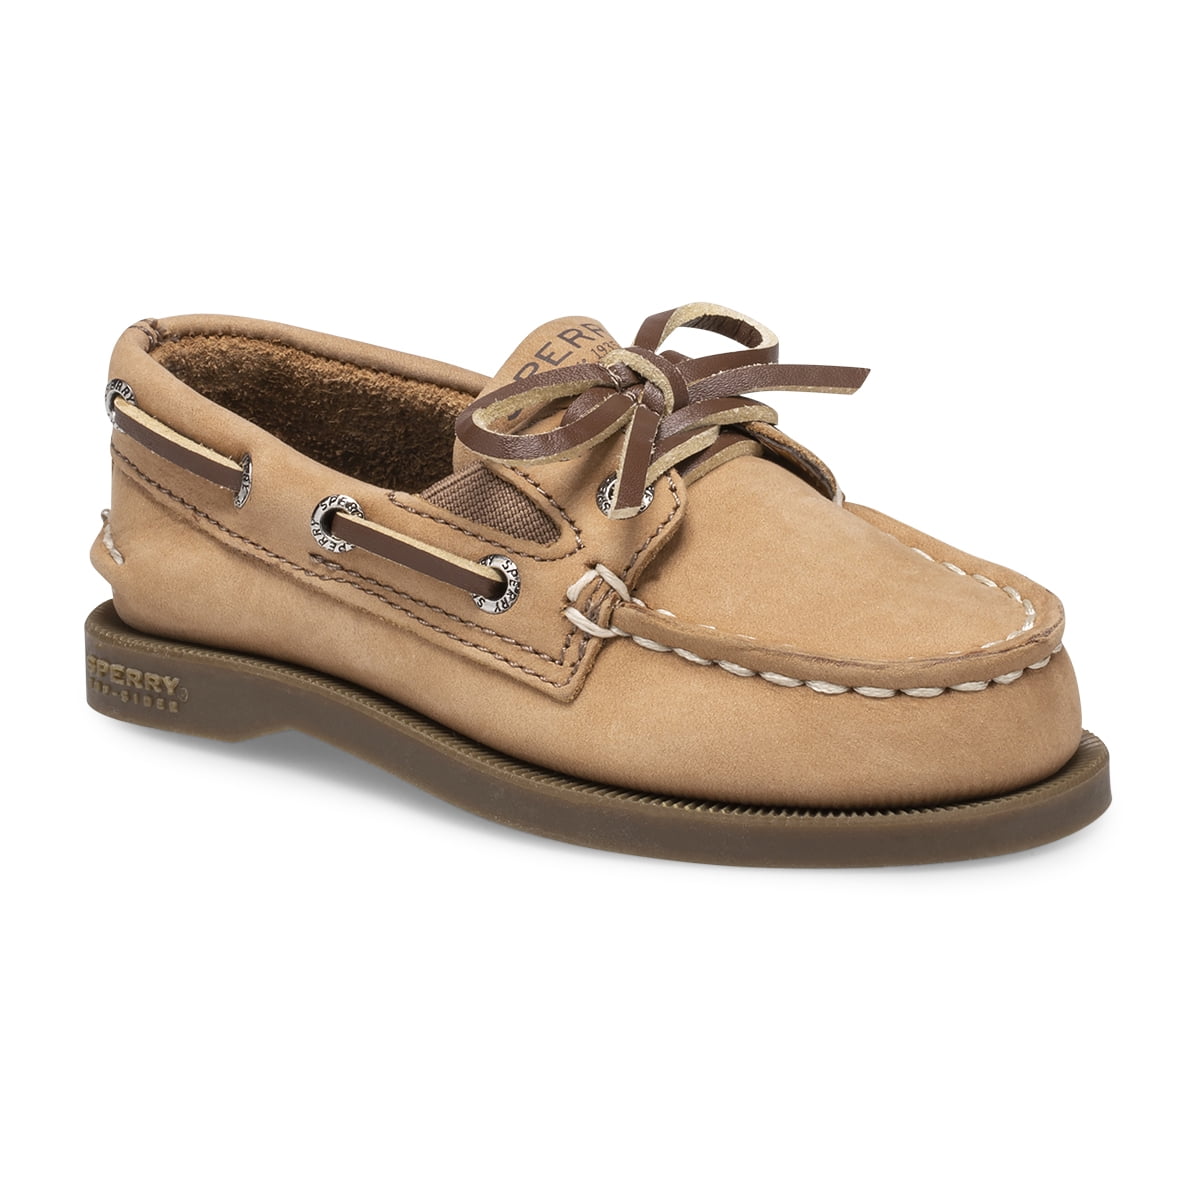 Sperry Top-Sider Authentic Original Kid's Leather Slip On Boat Shoe ...